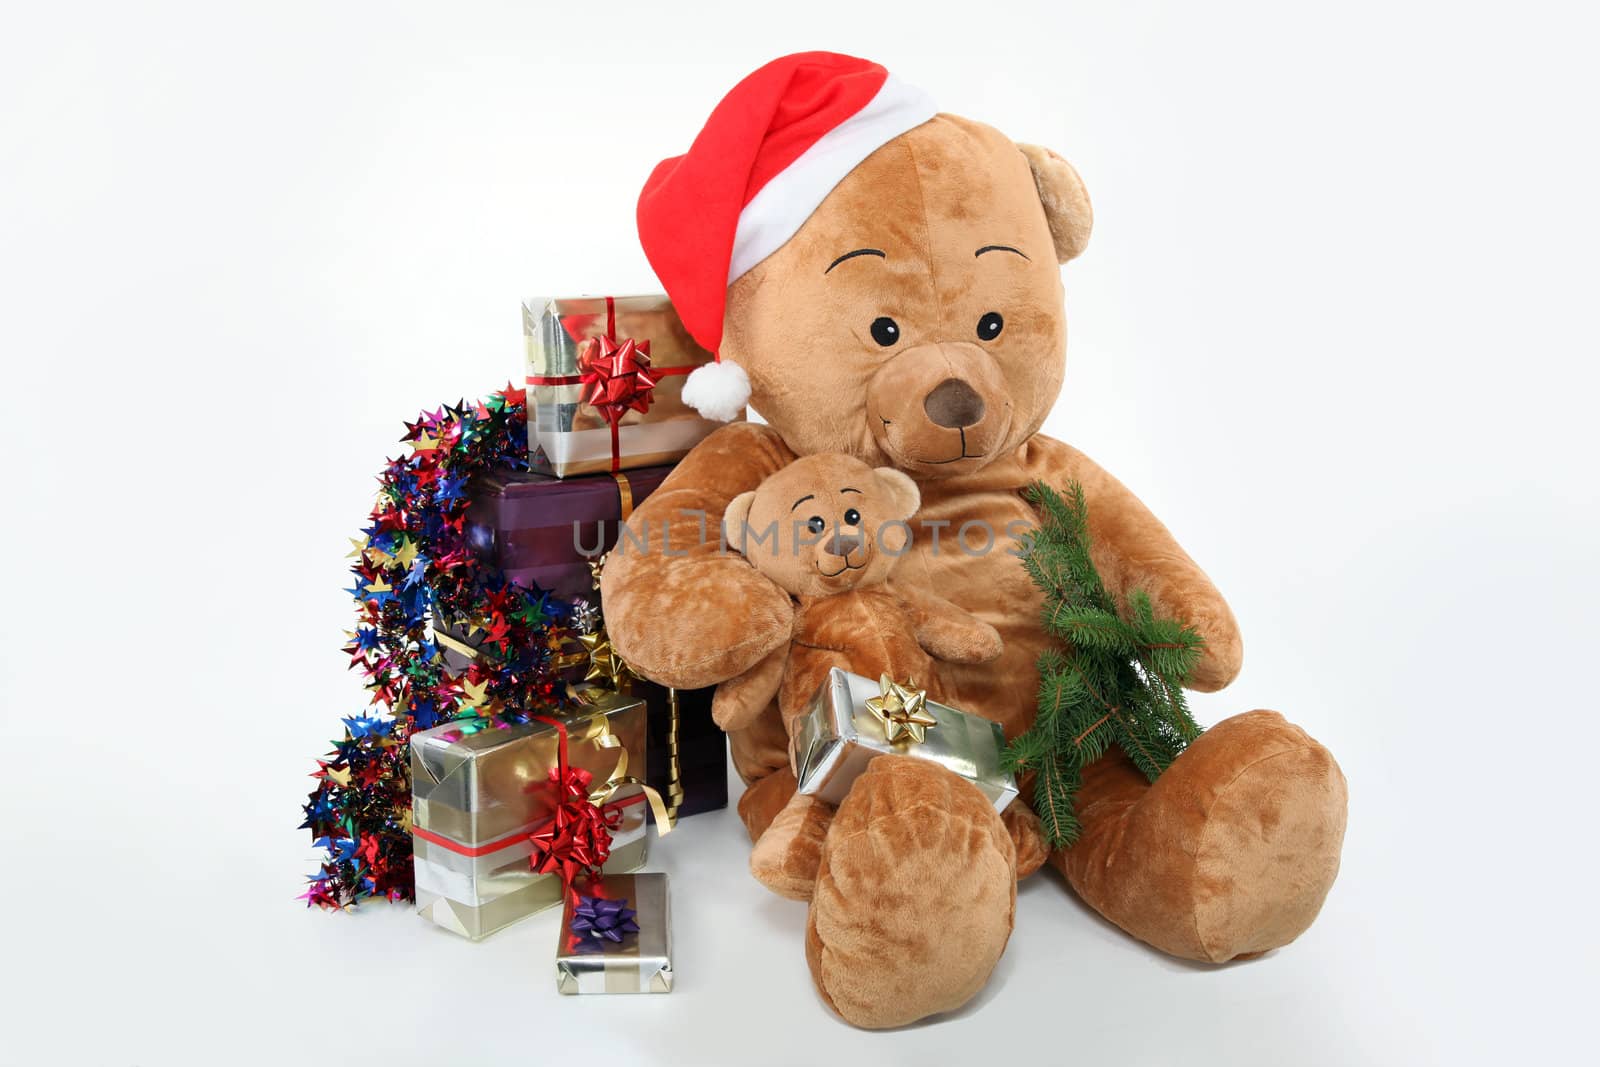 Huge teddy bear and Christmas gifts on white background by phovoir